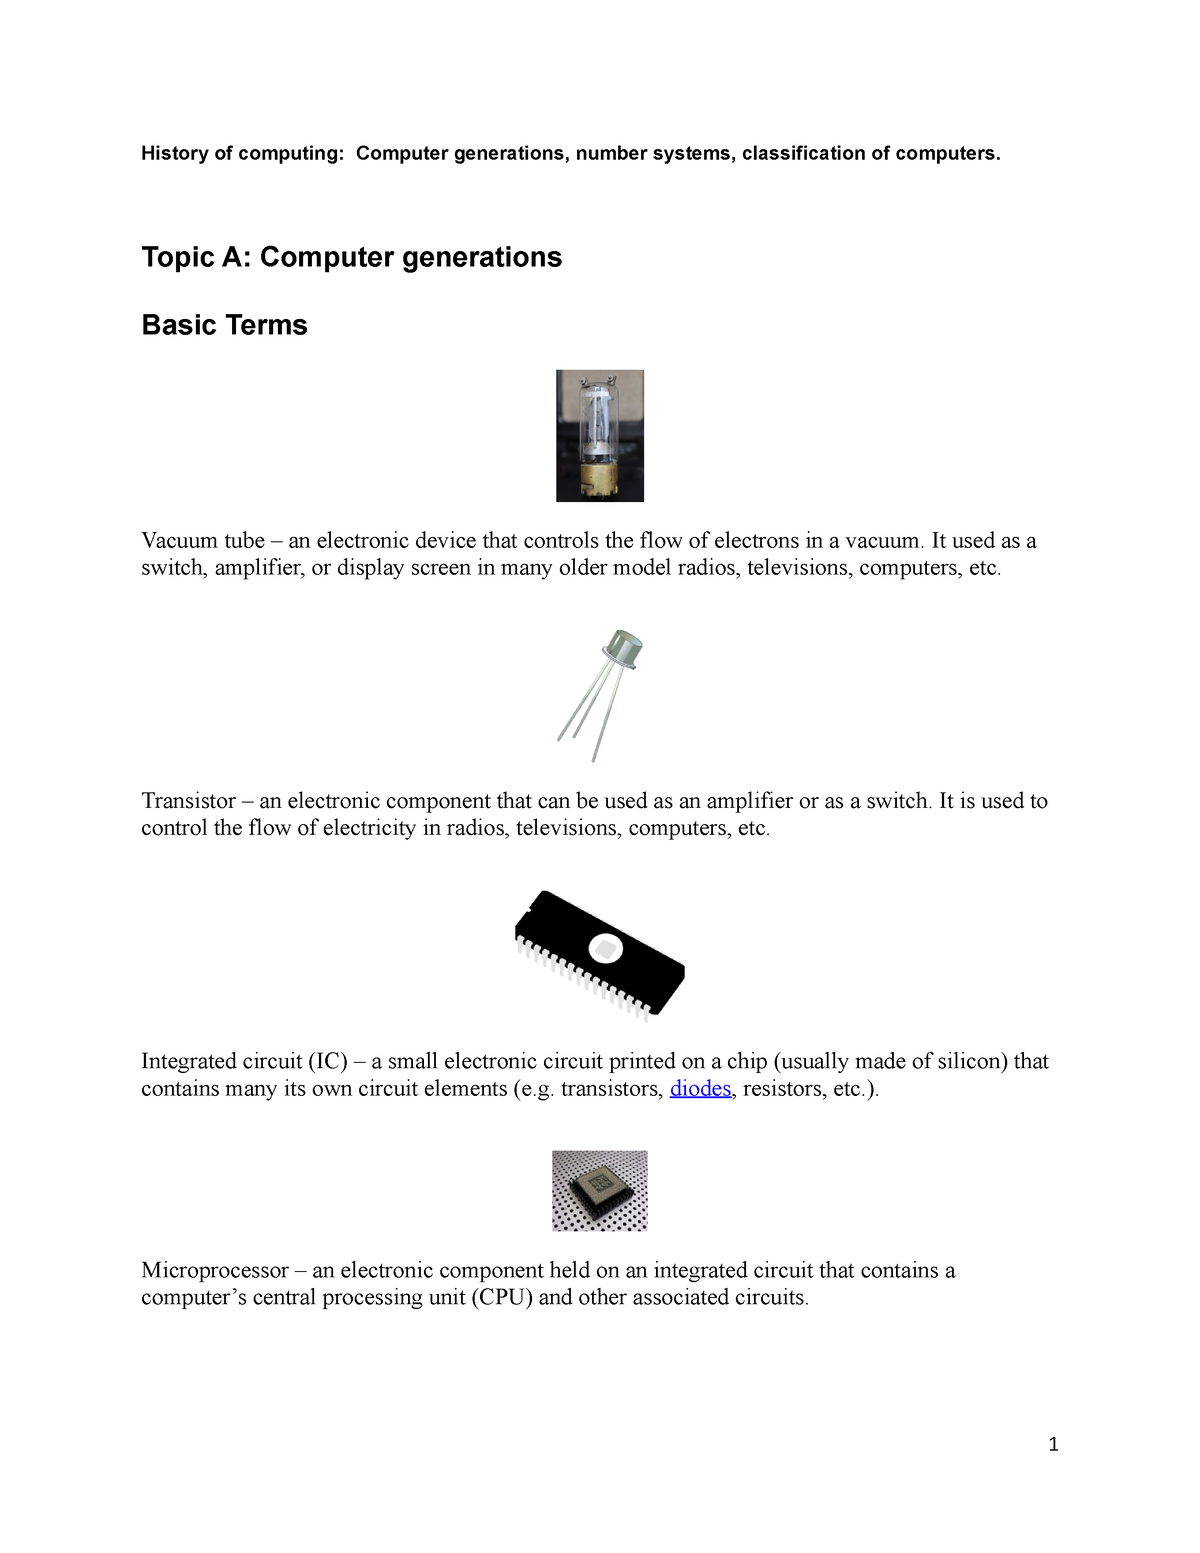 History of Computer Generations